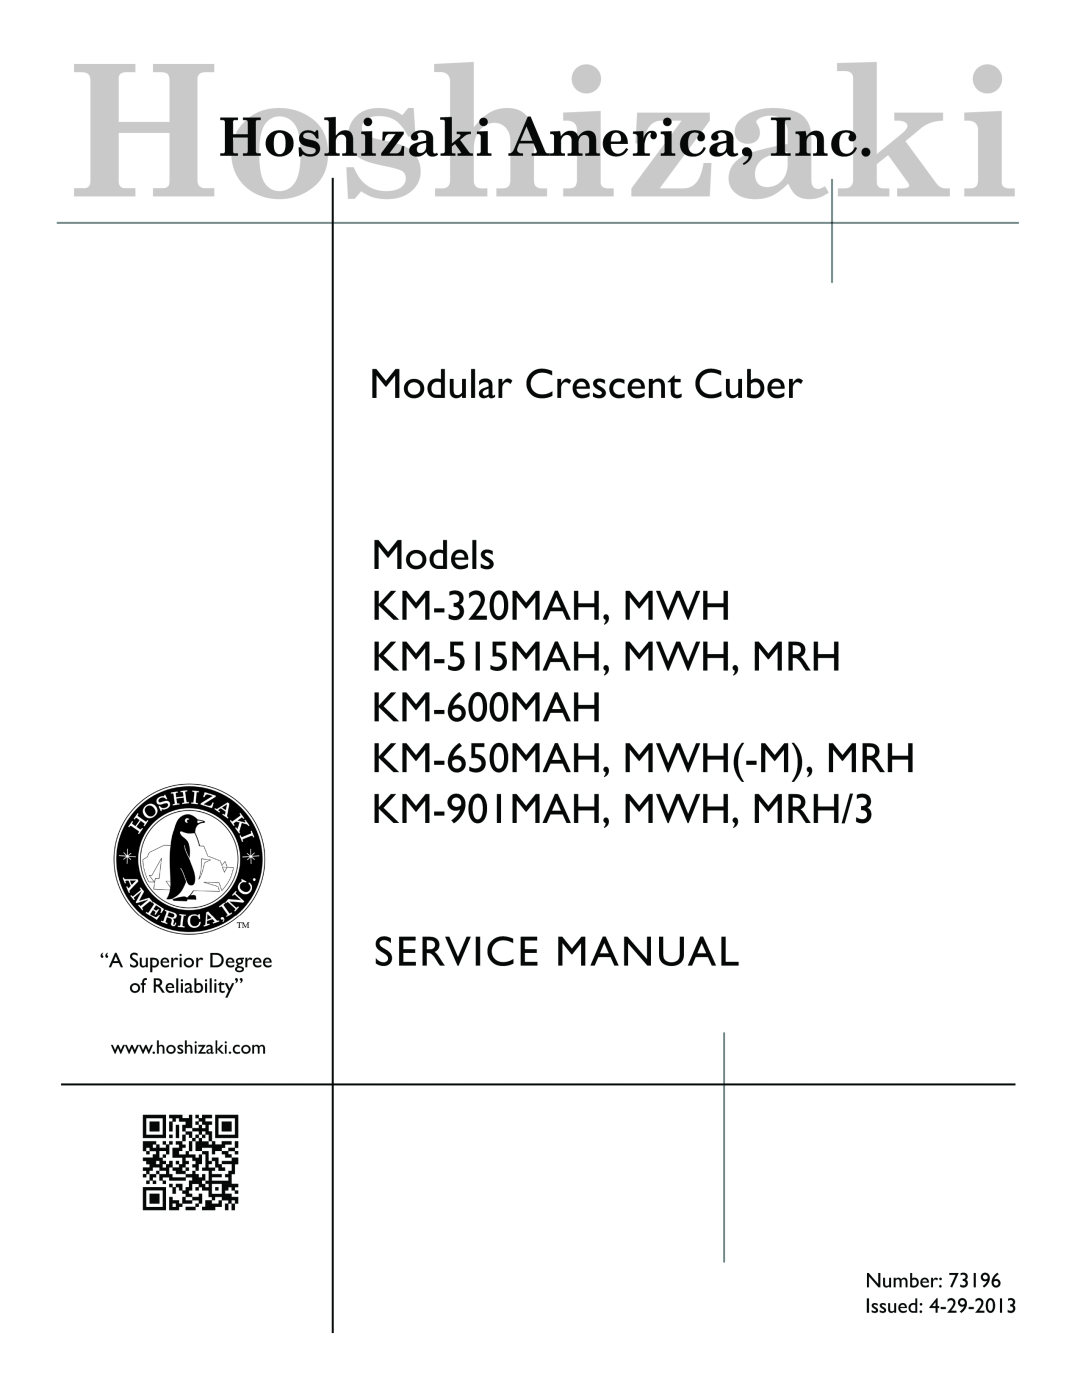 Hoshizaki KM-320MWH, KM-320MAH service manual “A Superior Degree of Reliability”, Number Issued Revised 